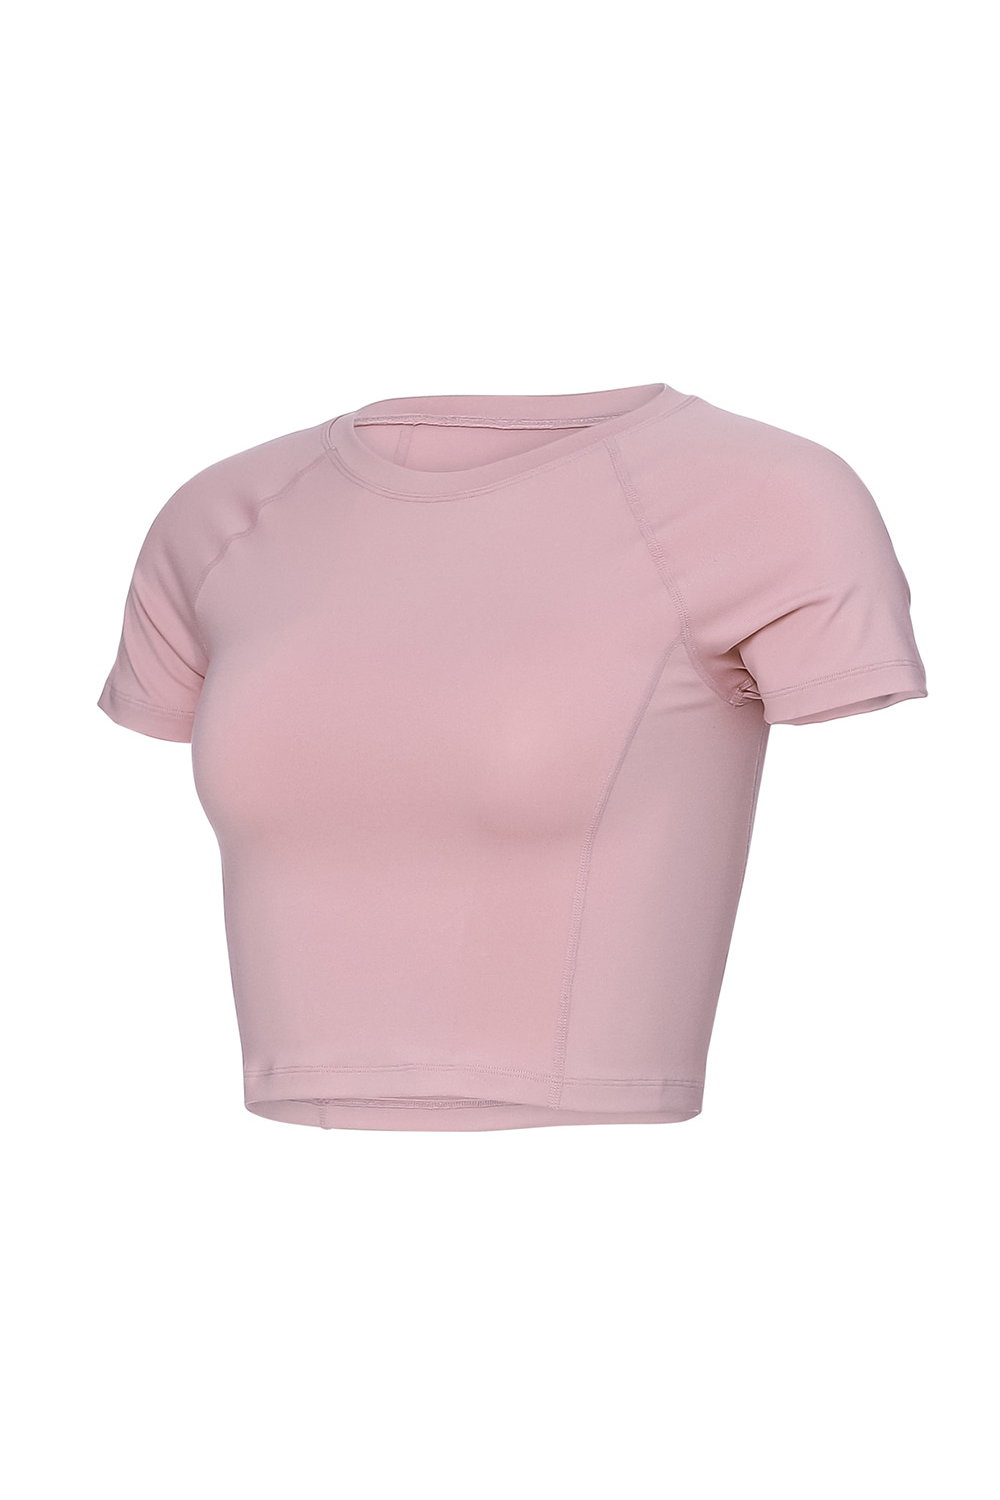 Airtouch Pace Crop Short Sleeve